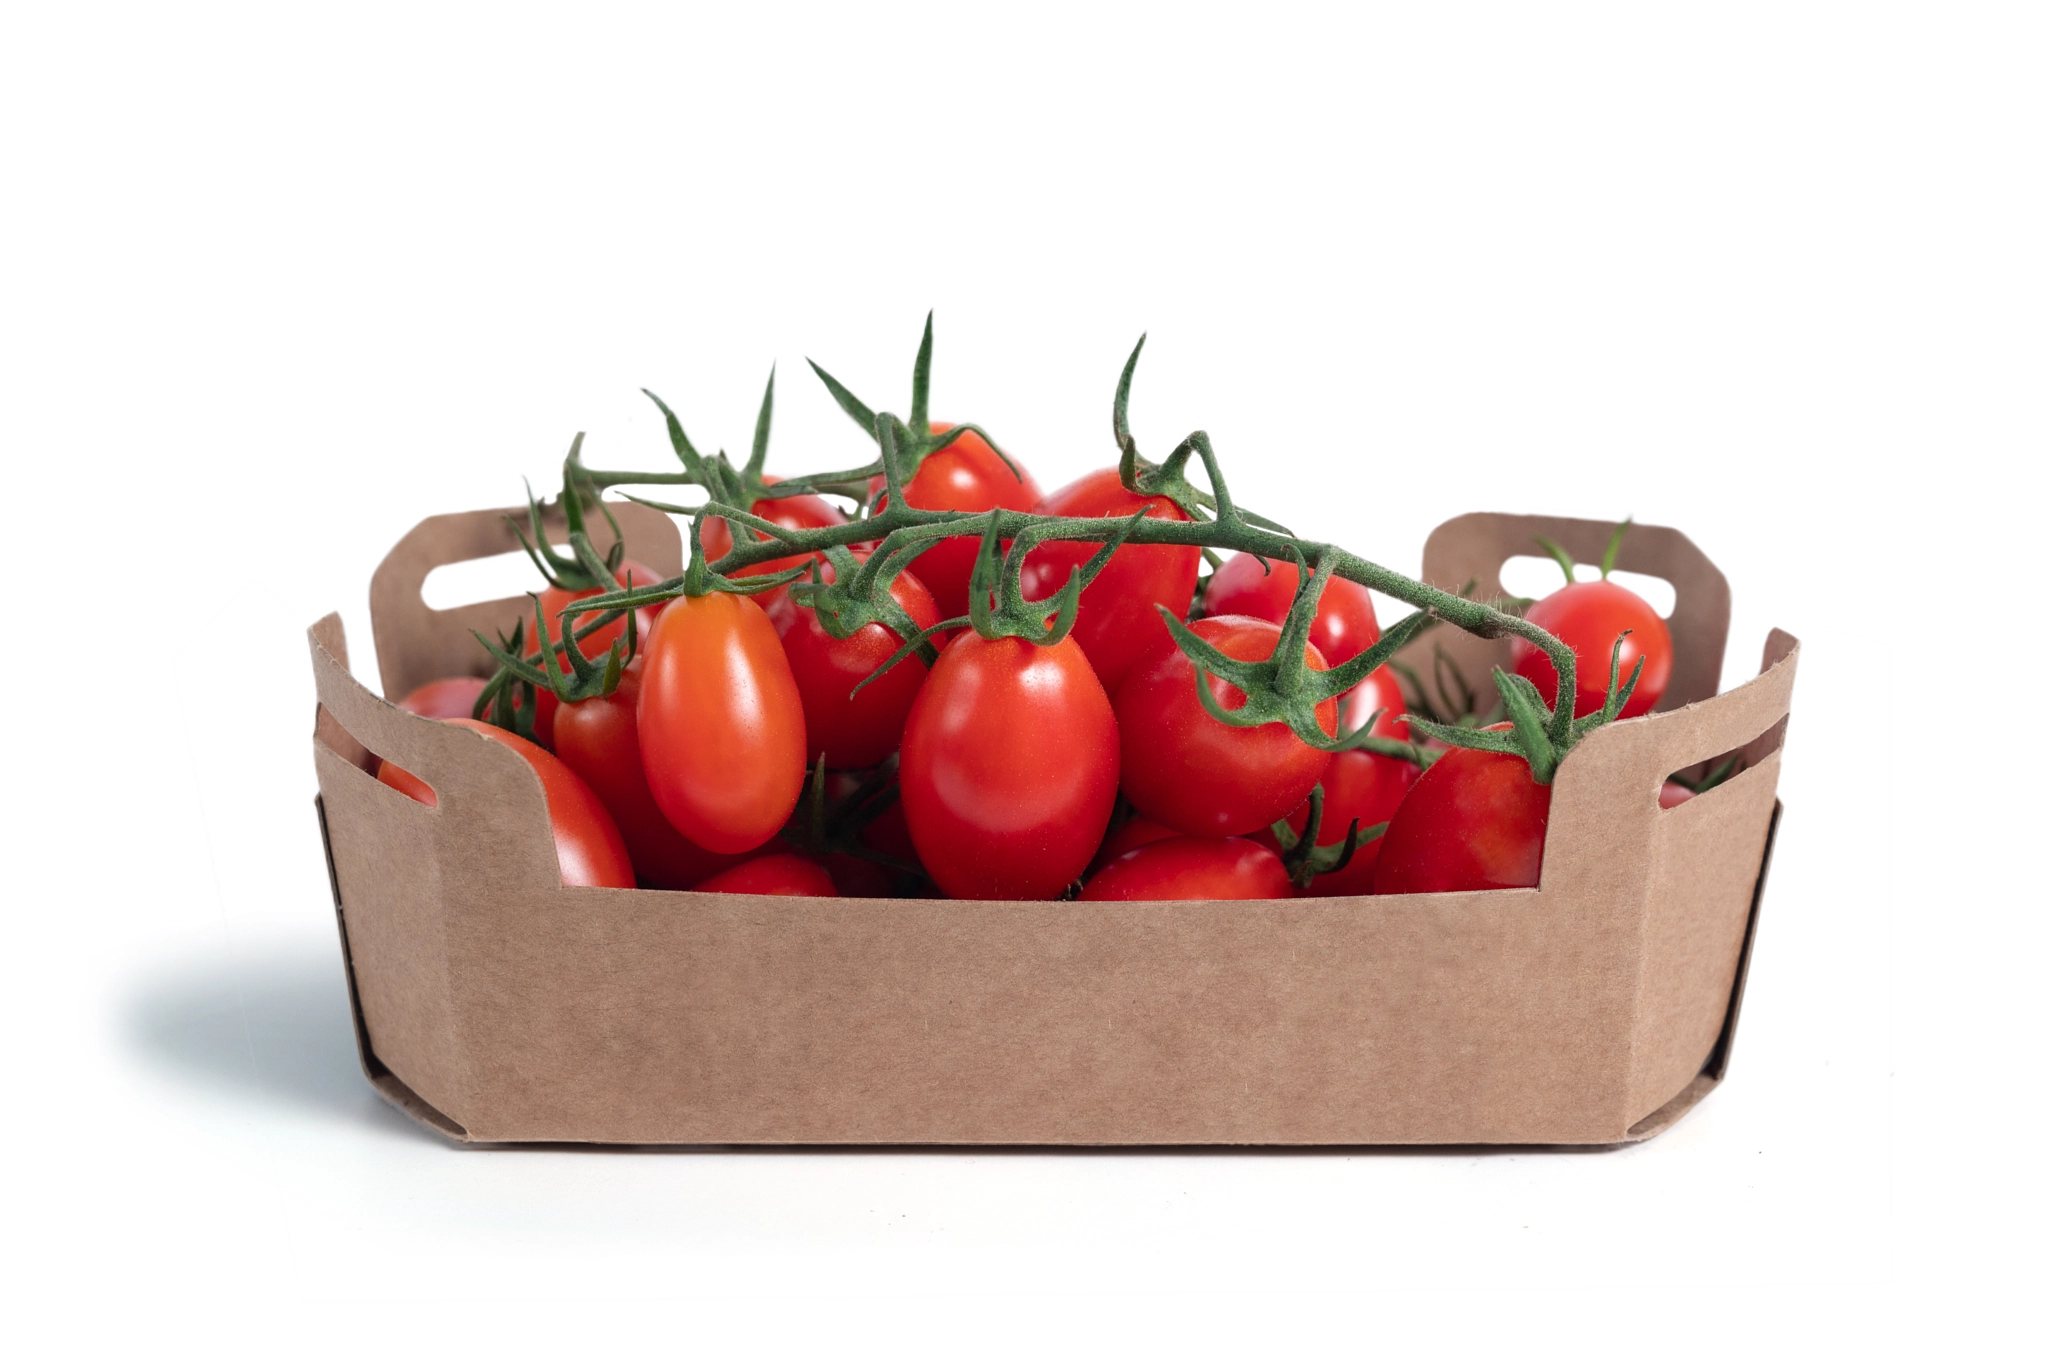 Branch tomato in recyclable box isolated from the background